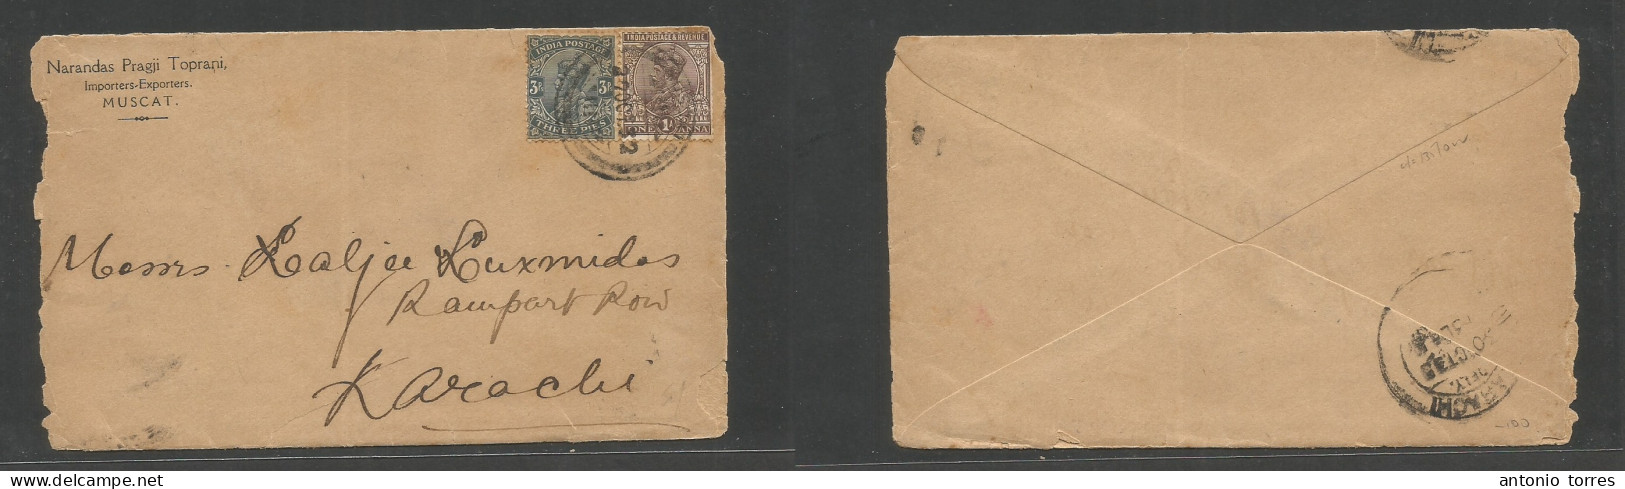 Oman. 1932 (27 Oct) Indian Used In Muscat - Karachi, Pakistan (30 Oct) Comercial Multifkd Env At 3p 1a Rate Cds. Fine Na - Omán